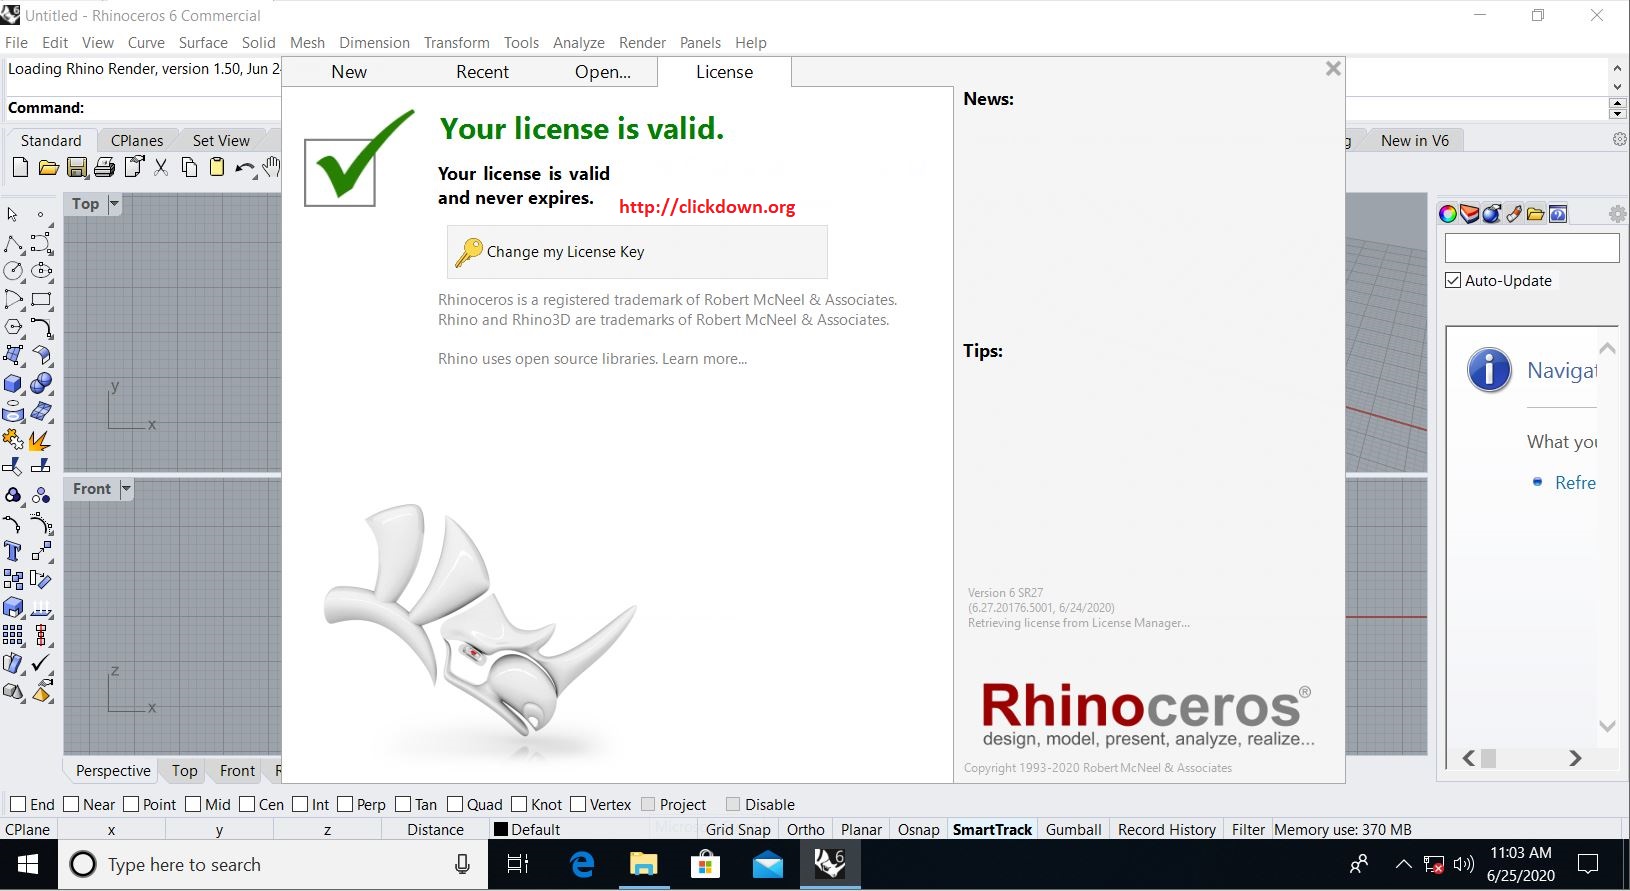 Working with Rhinoceros 6.27 full license